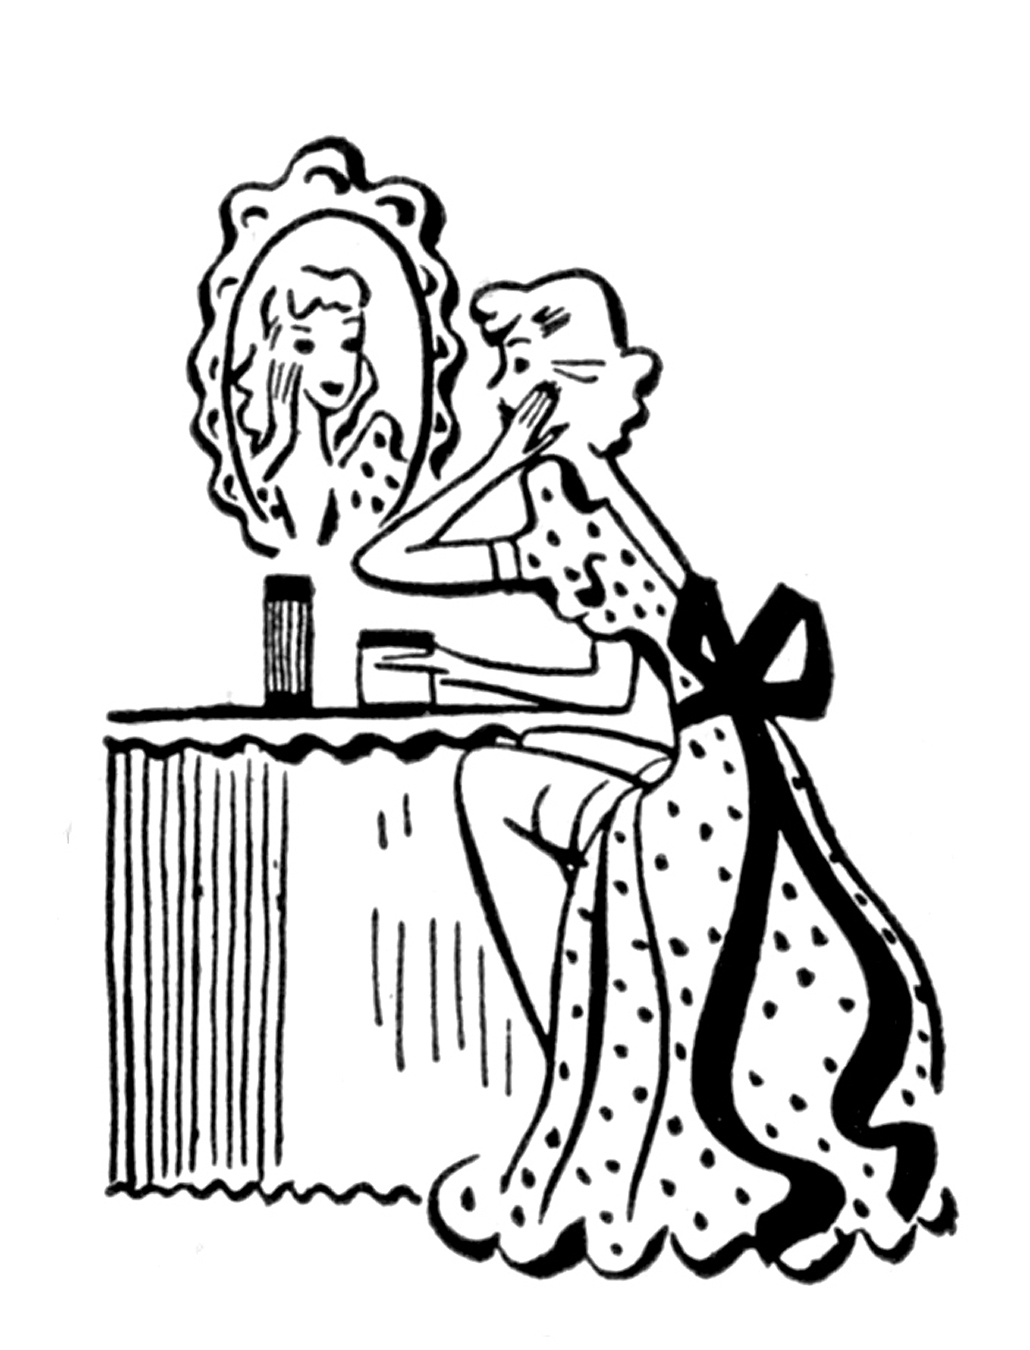 Clipart Retro Black And White Woman Reading Under A Hair Salon Dryer